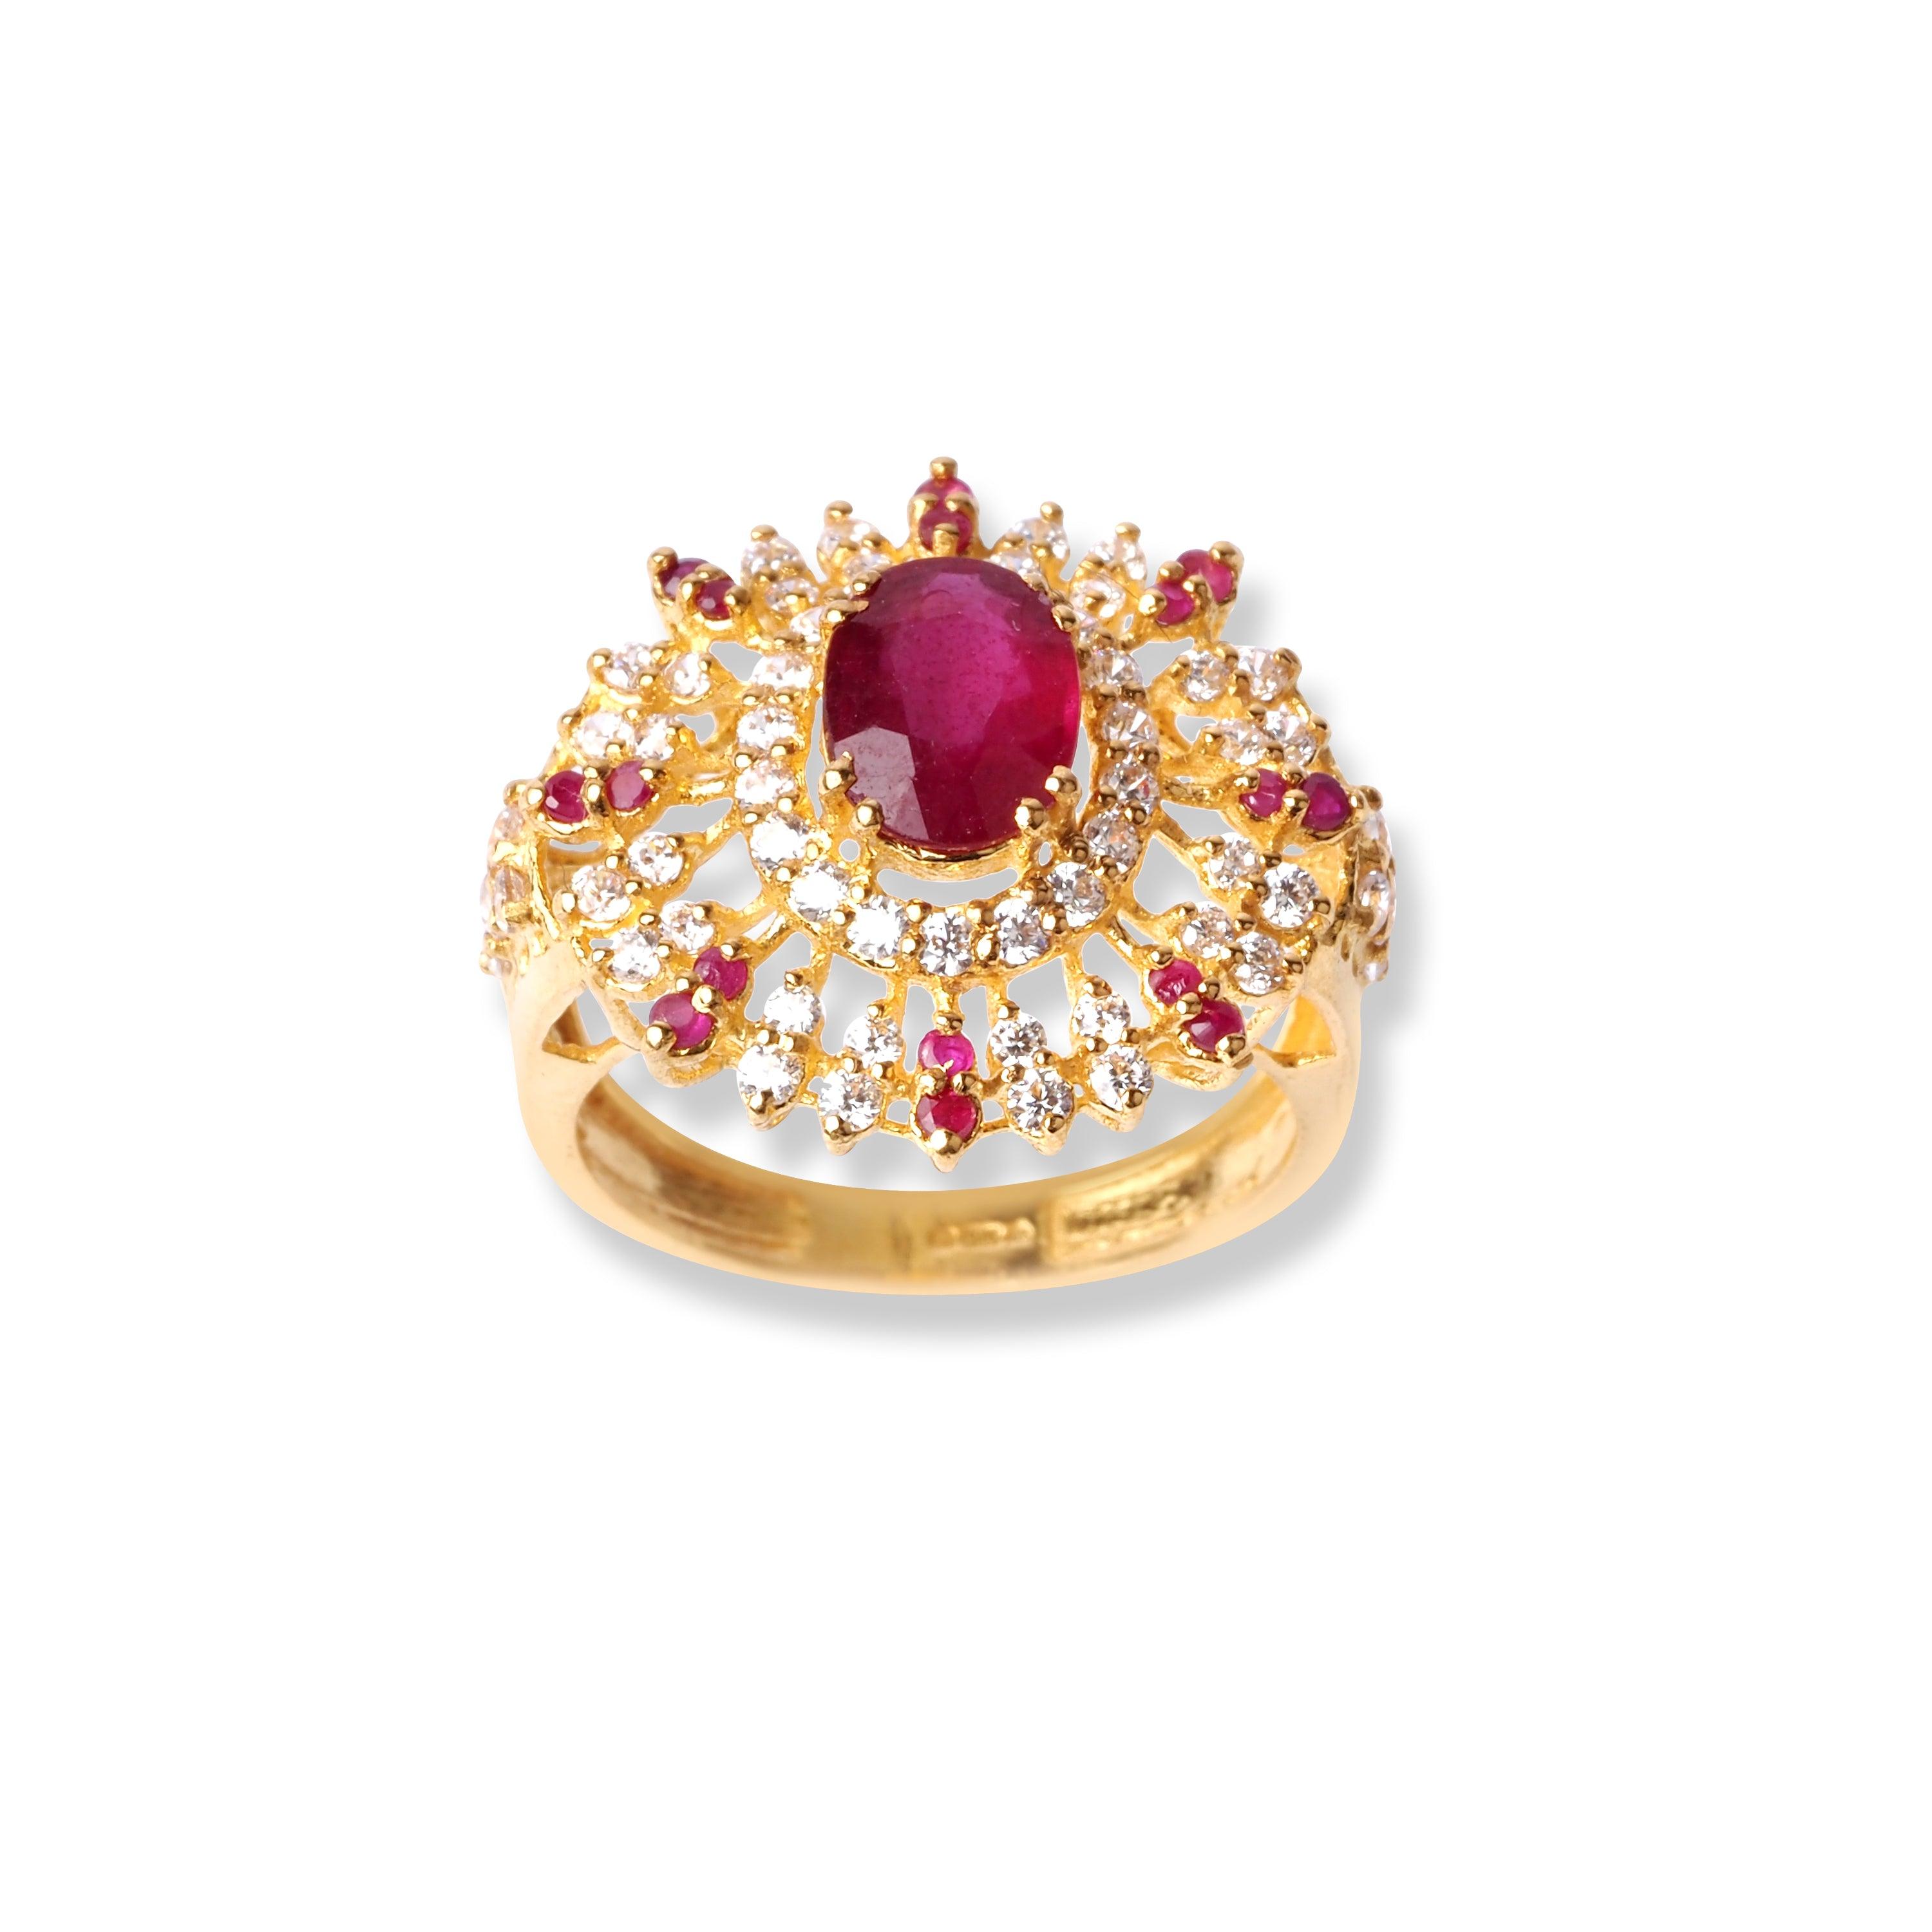 22ct Gold Ring with Pink & White Cubic Zirconia Stones (5.9g) LR-16587 - Minar Jewellers